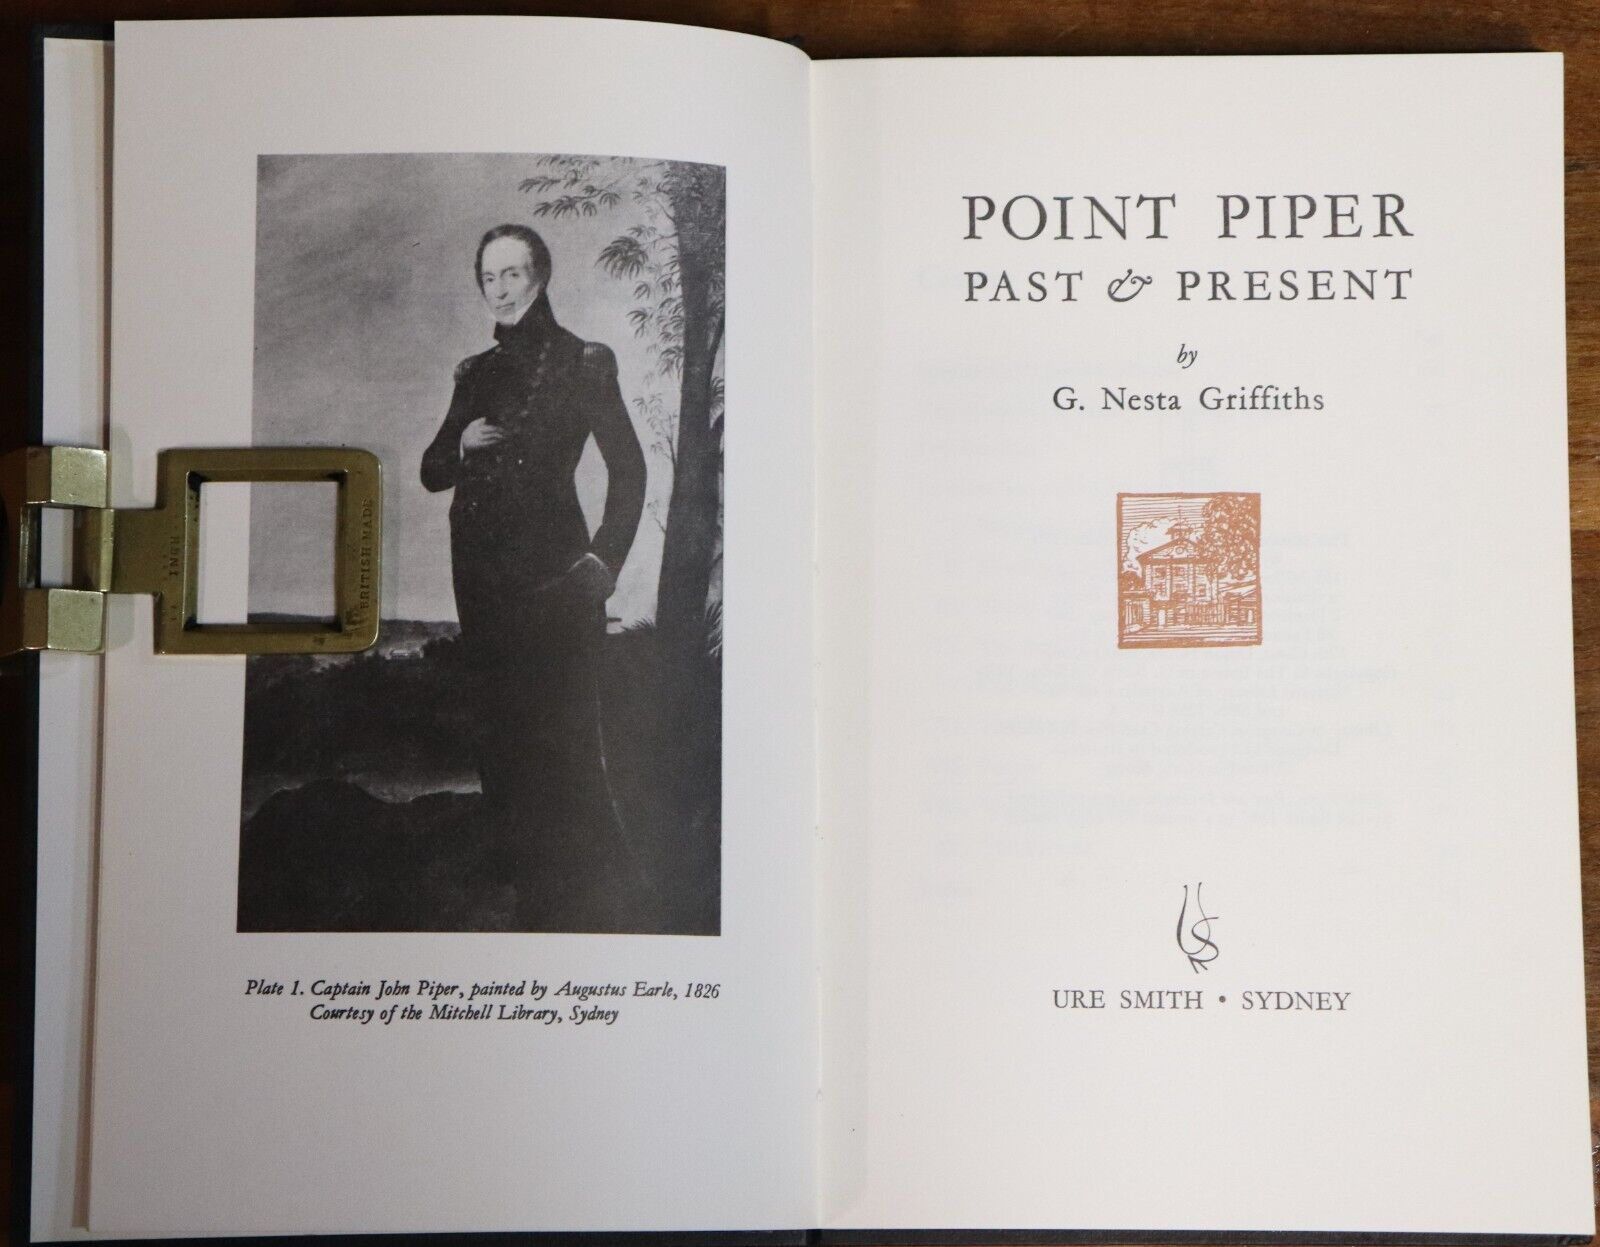 Point Piper Past & Present by G Nesta Griffiths - 1970 - Australian History Book